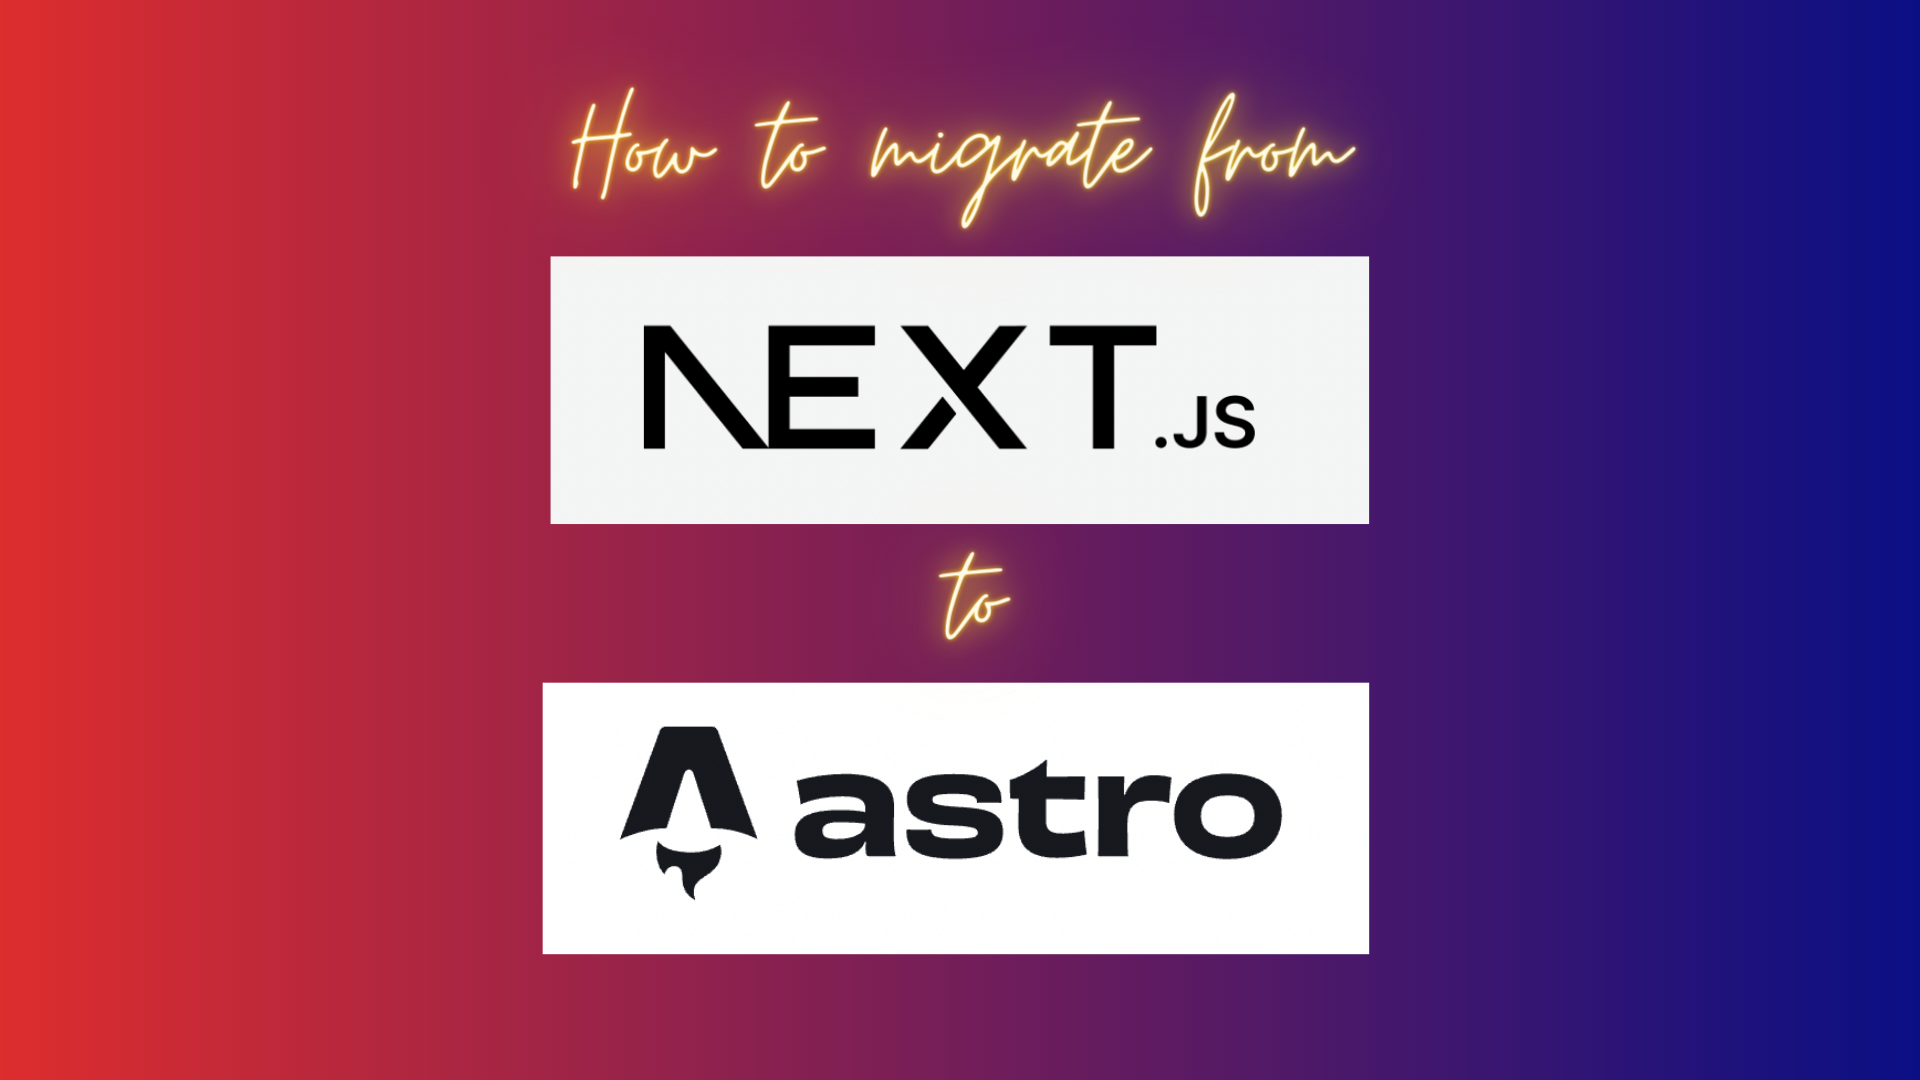 How to migrate from Next.js to Astro (with logos) on blended red and blue background